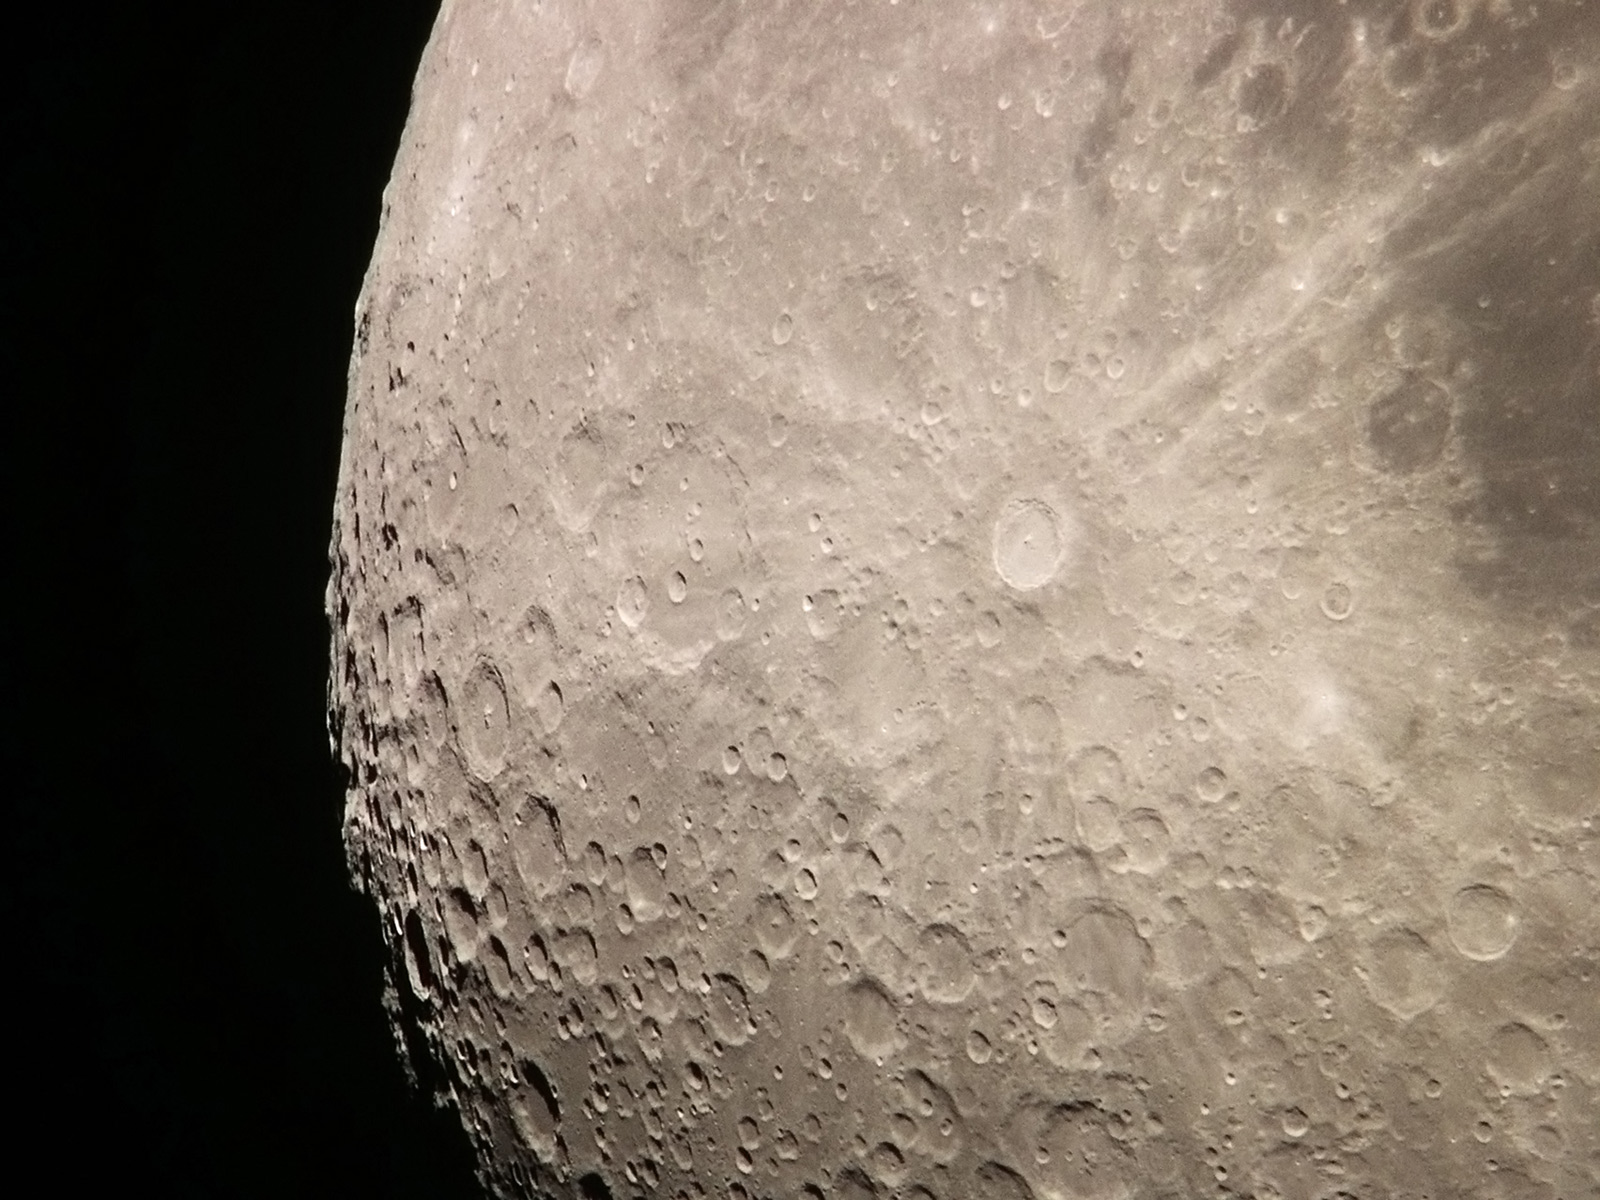 Crater Tycho and Clavius